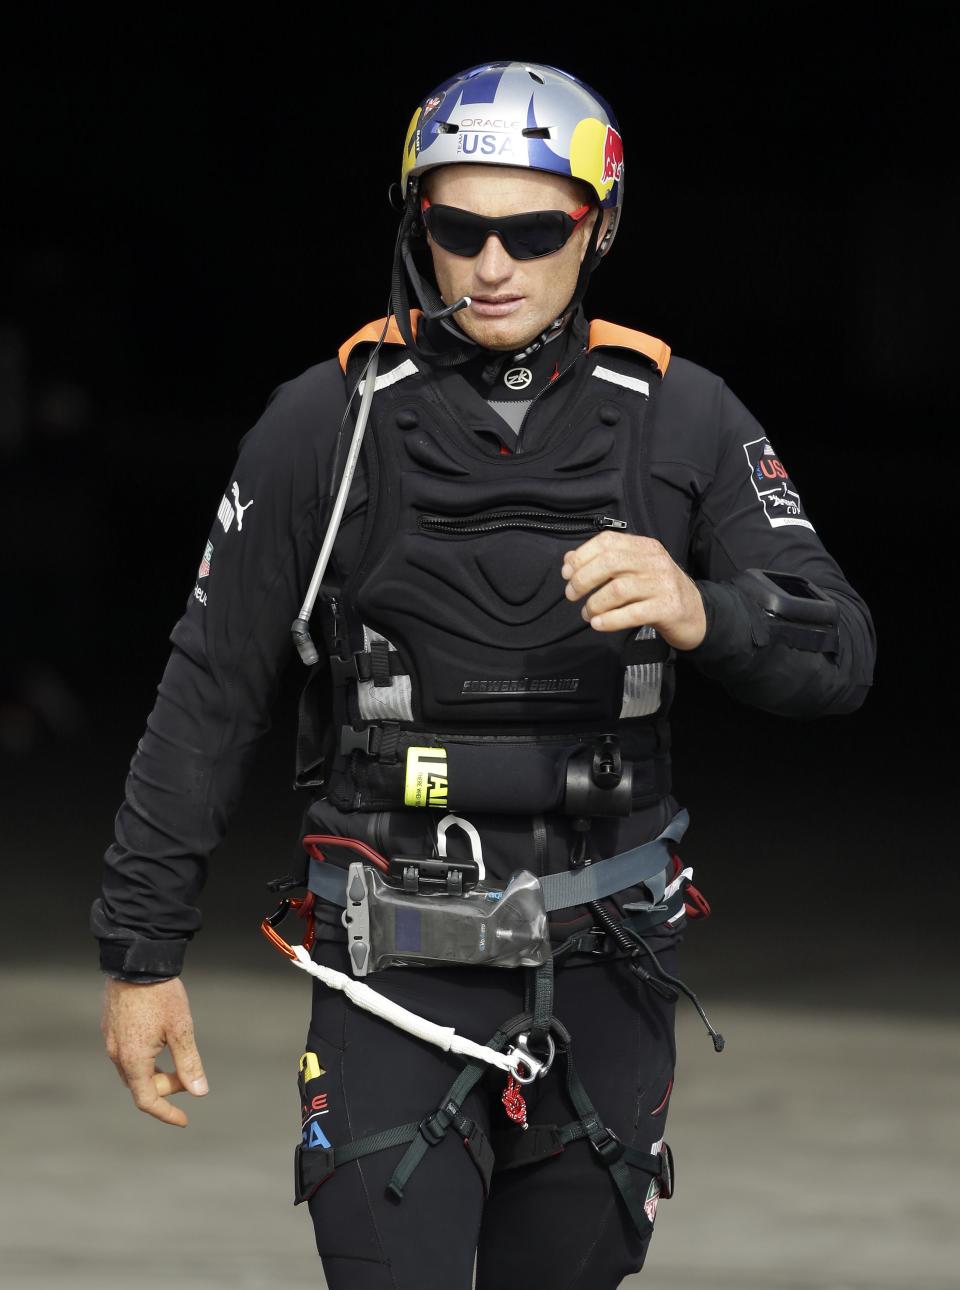 Oracle Team USA skipper Jimmy Spithill walks out of the team's base and heads for his boat during training for the America's Cup, Wednesday, July 3, 2013, in San Francisco. Opening ceremonies for the sailing event are scheduled for Thursday. (AP Photo/Eric Risberg)